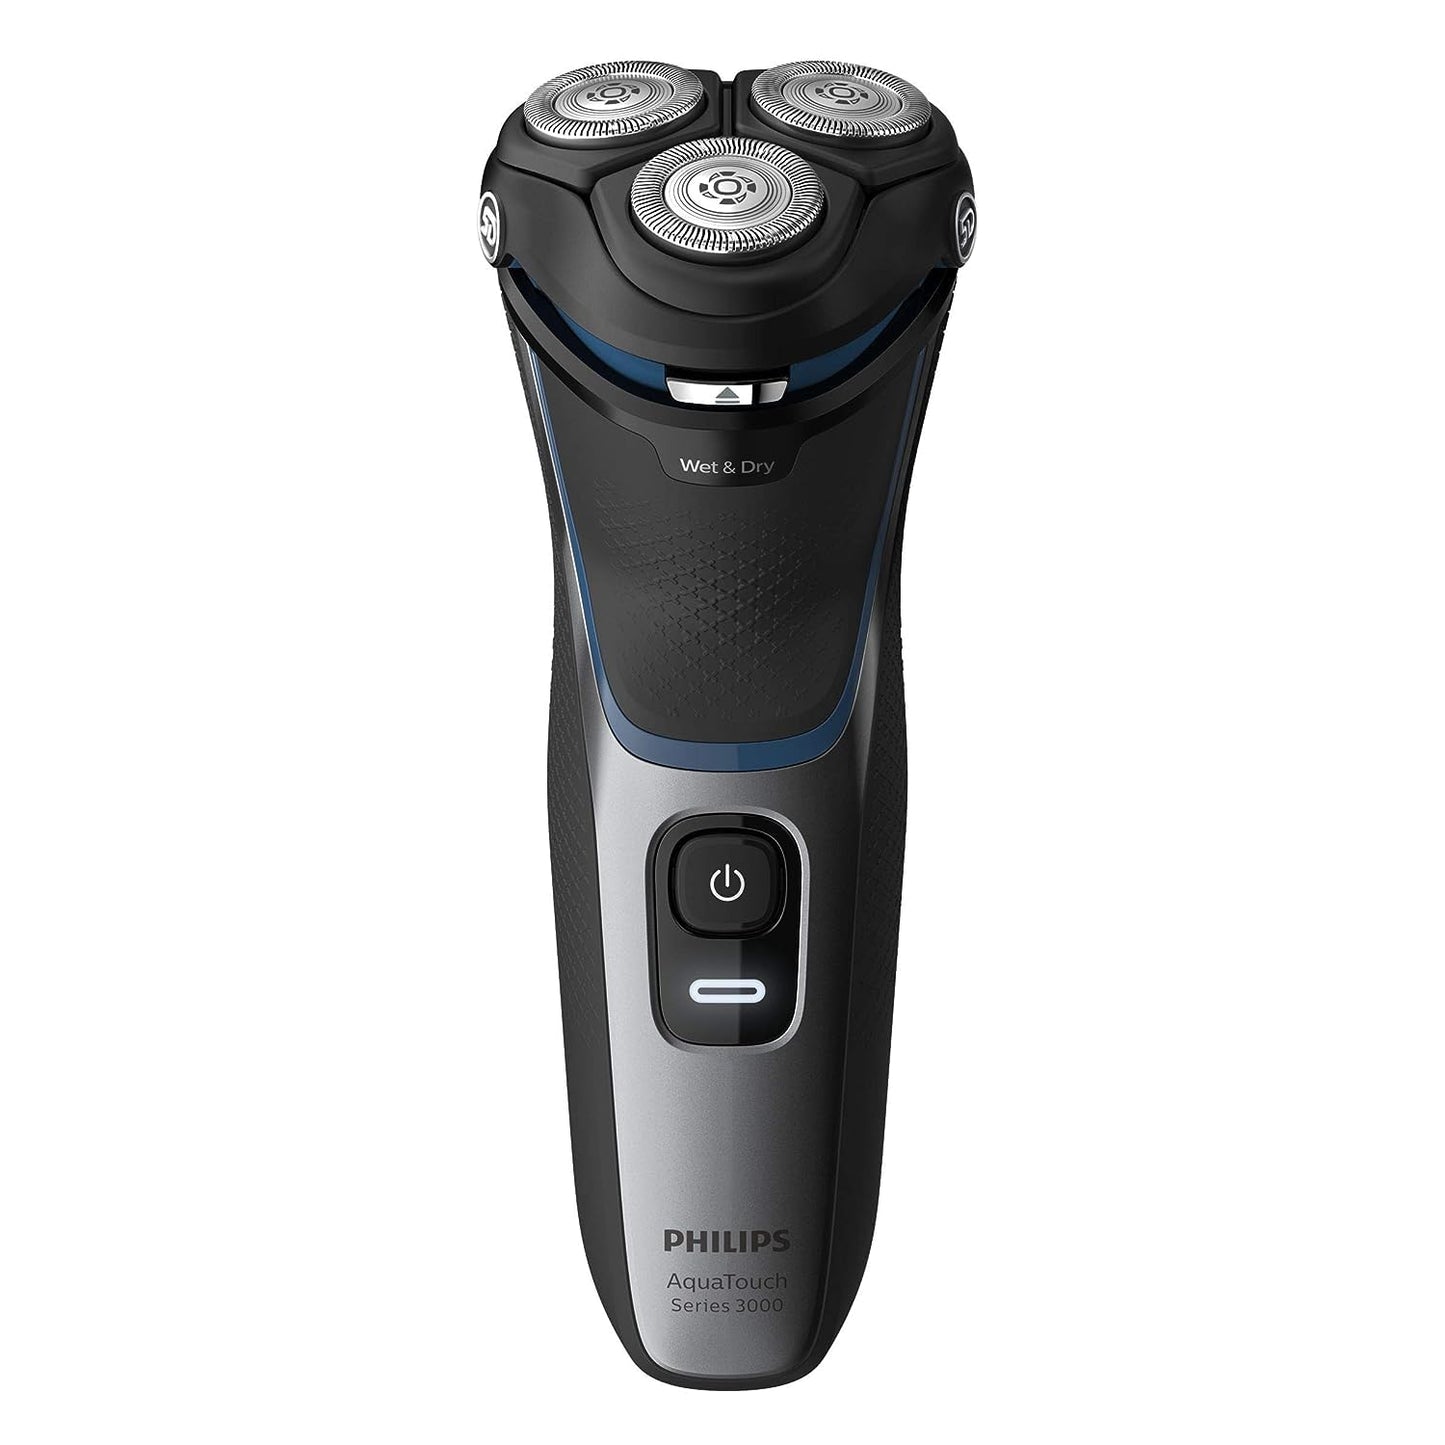 Philips Wet Or Dry Electric Shaver, Black, S312250. 2 Years Warranty